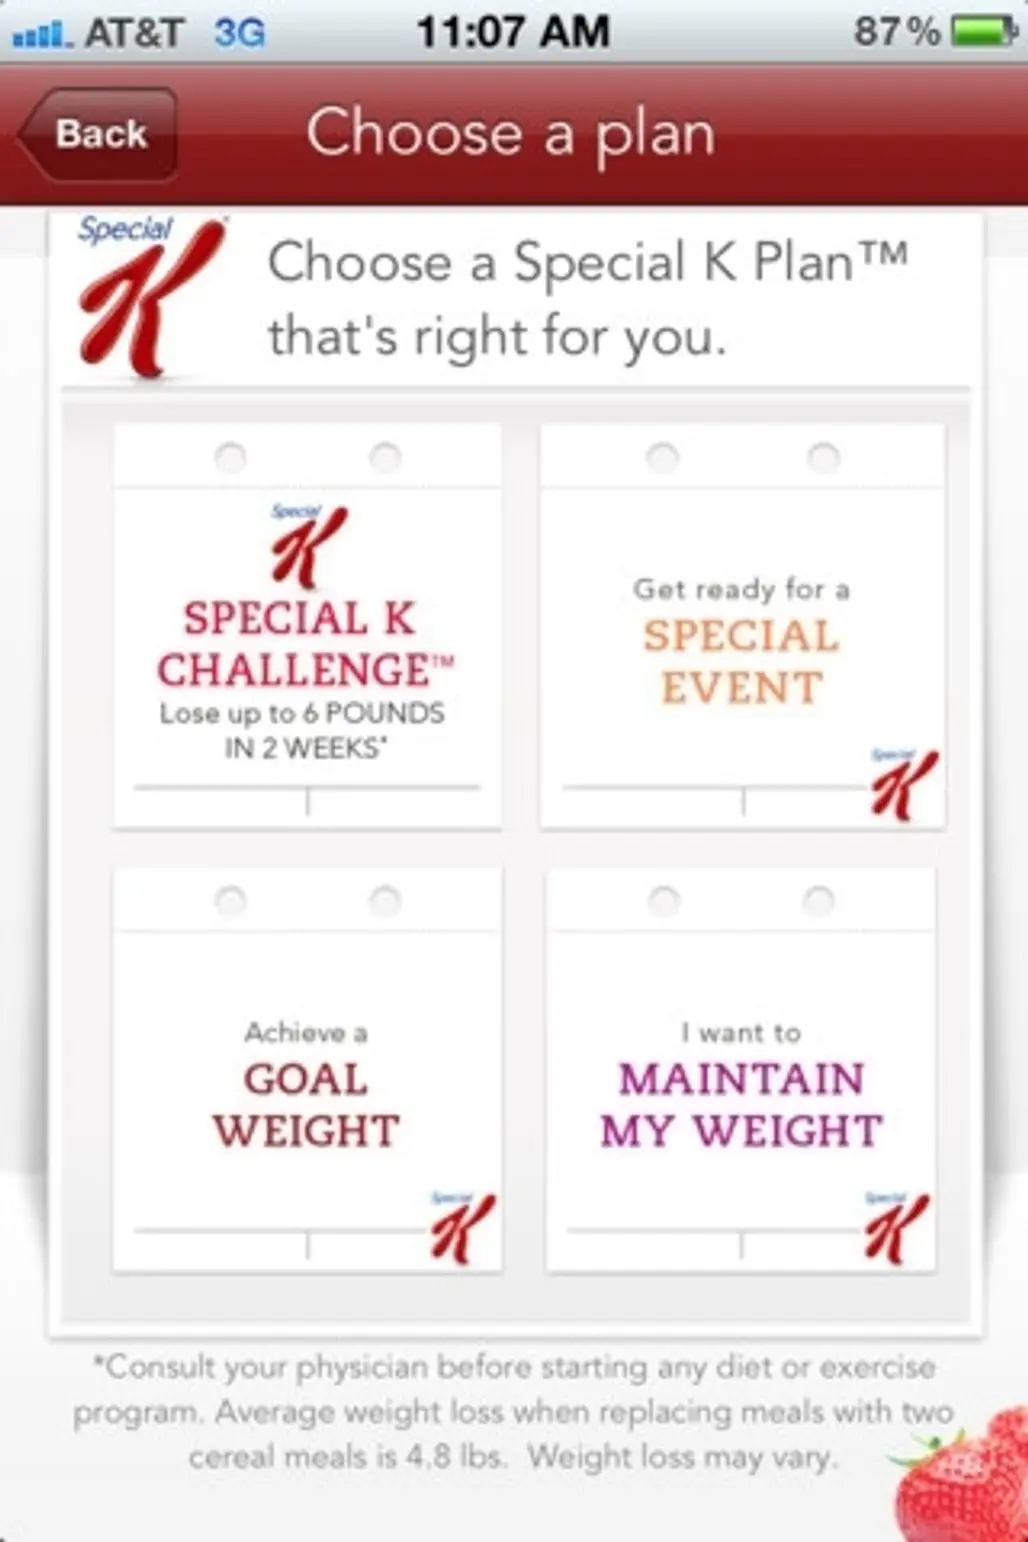 MyPlan – the Special K Challenge Mobile App